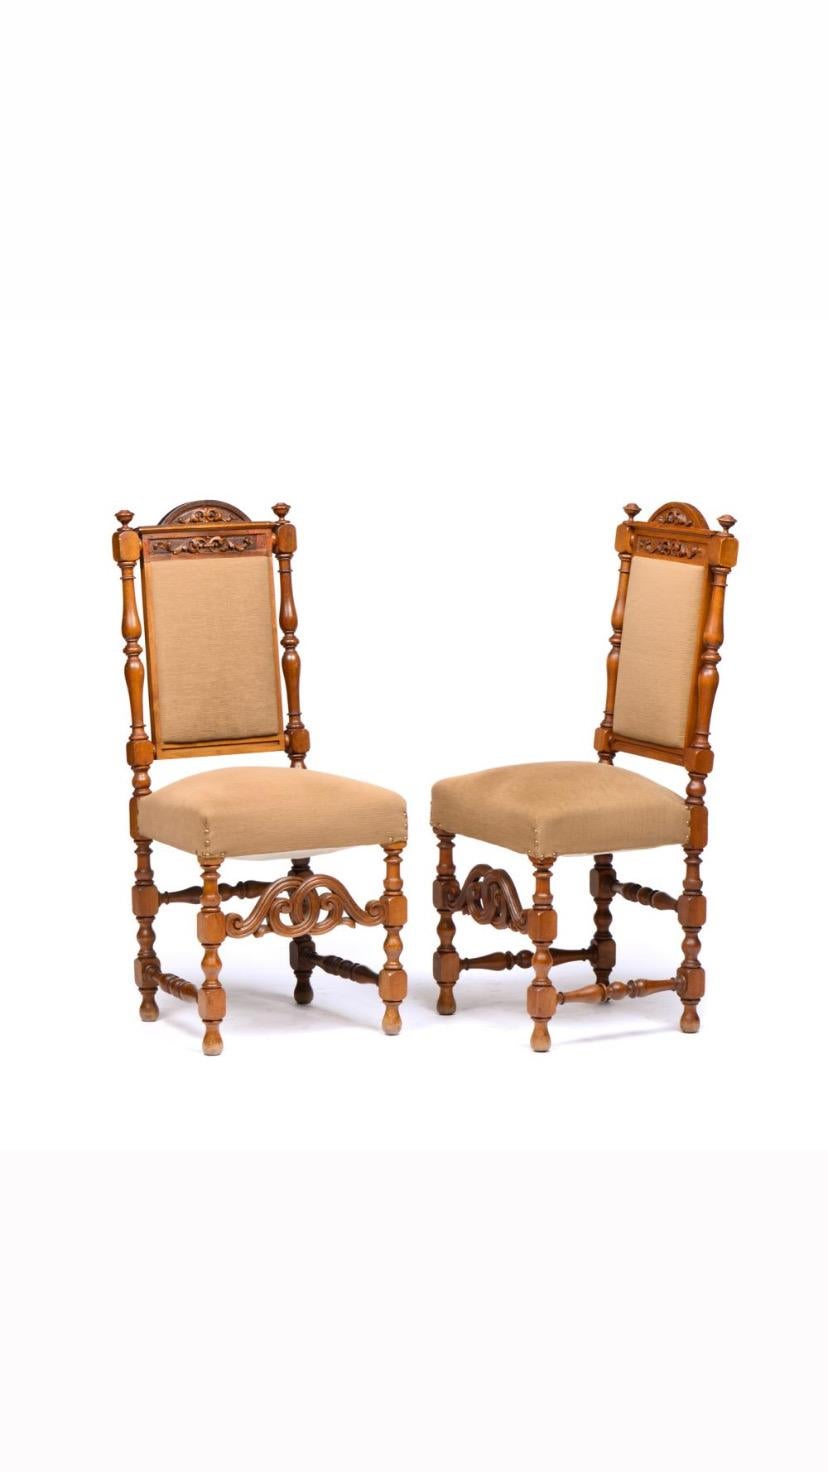 Set of 16 Portuguese Wooden Chairs, circa 19th Century For Sale 5